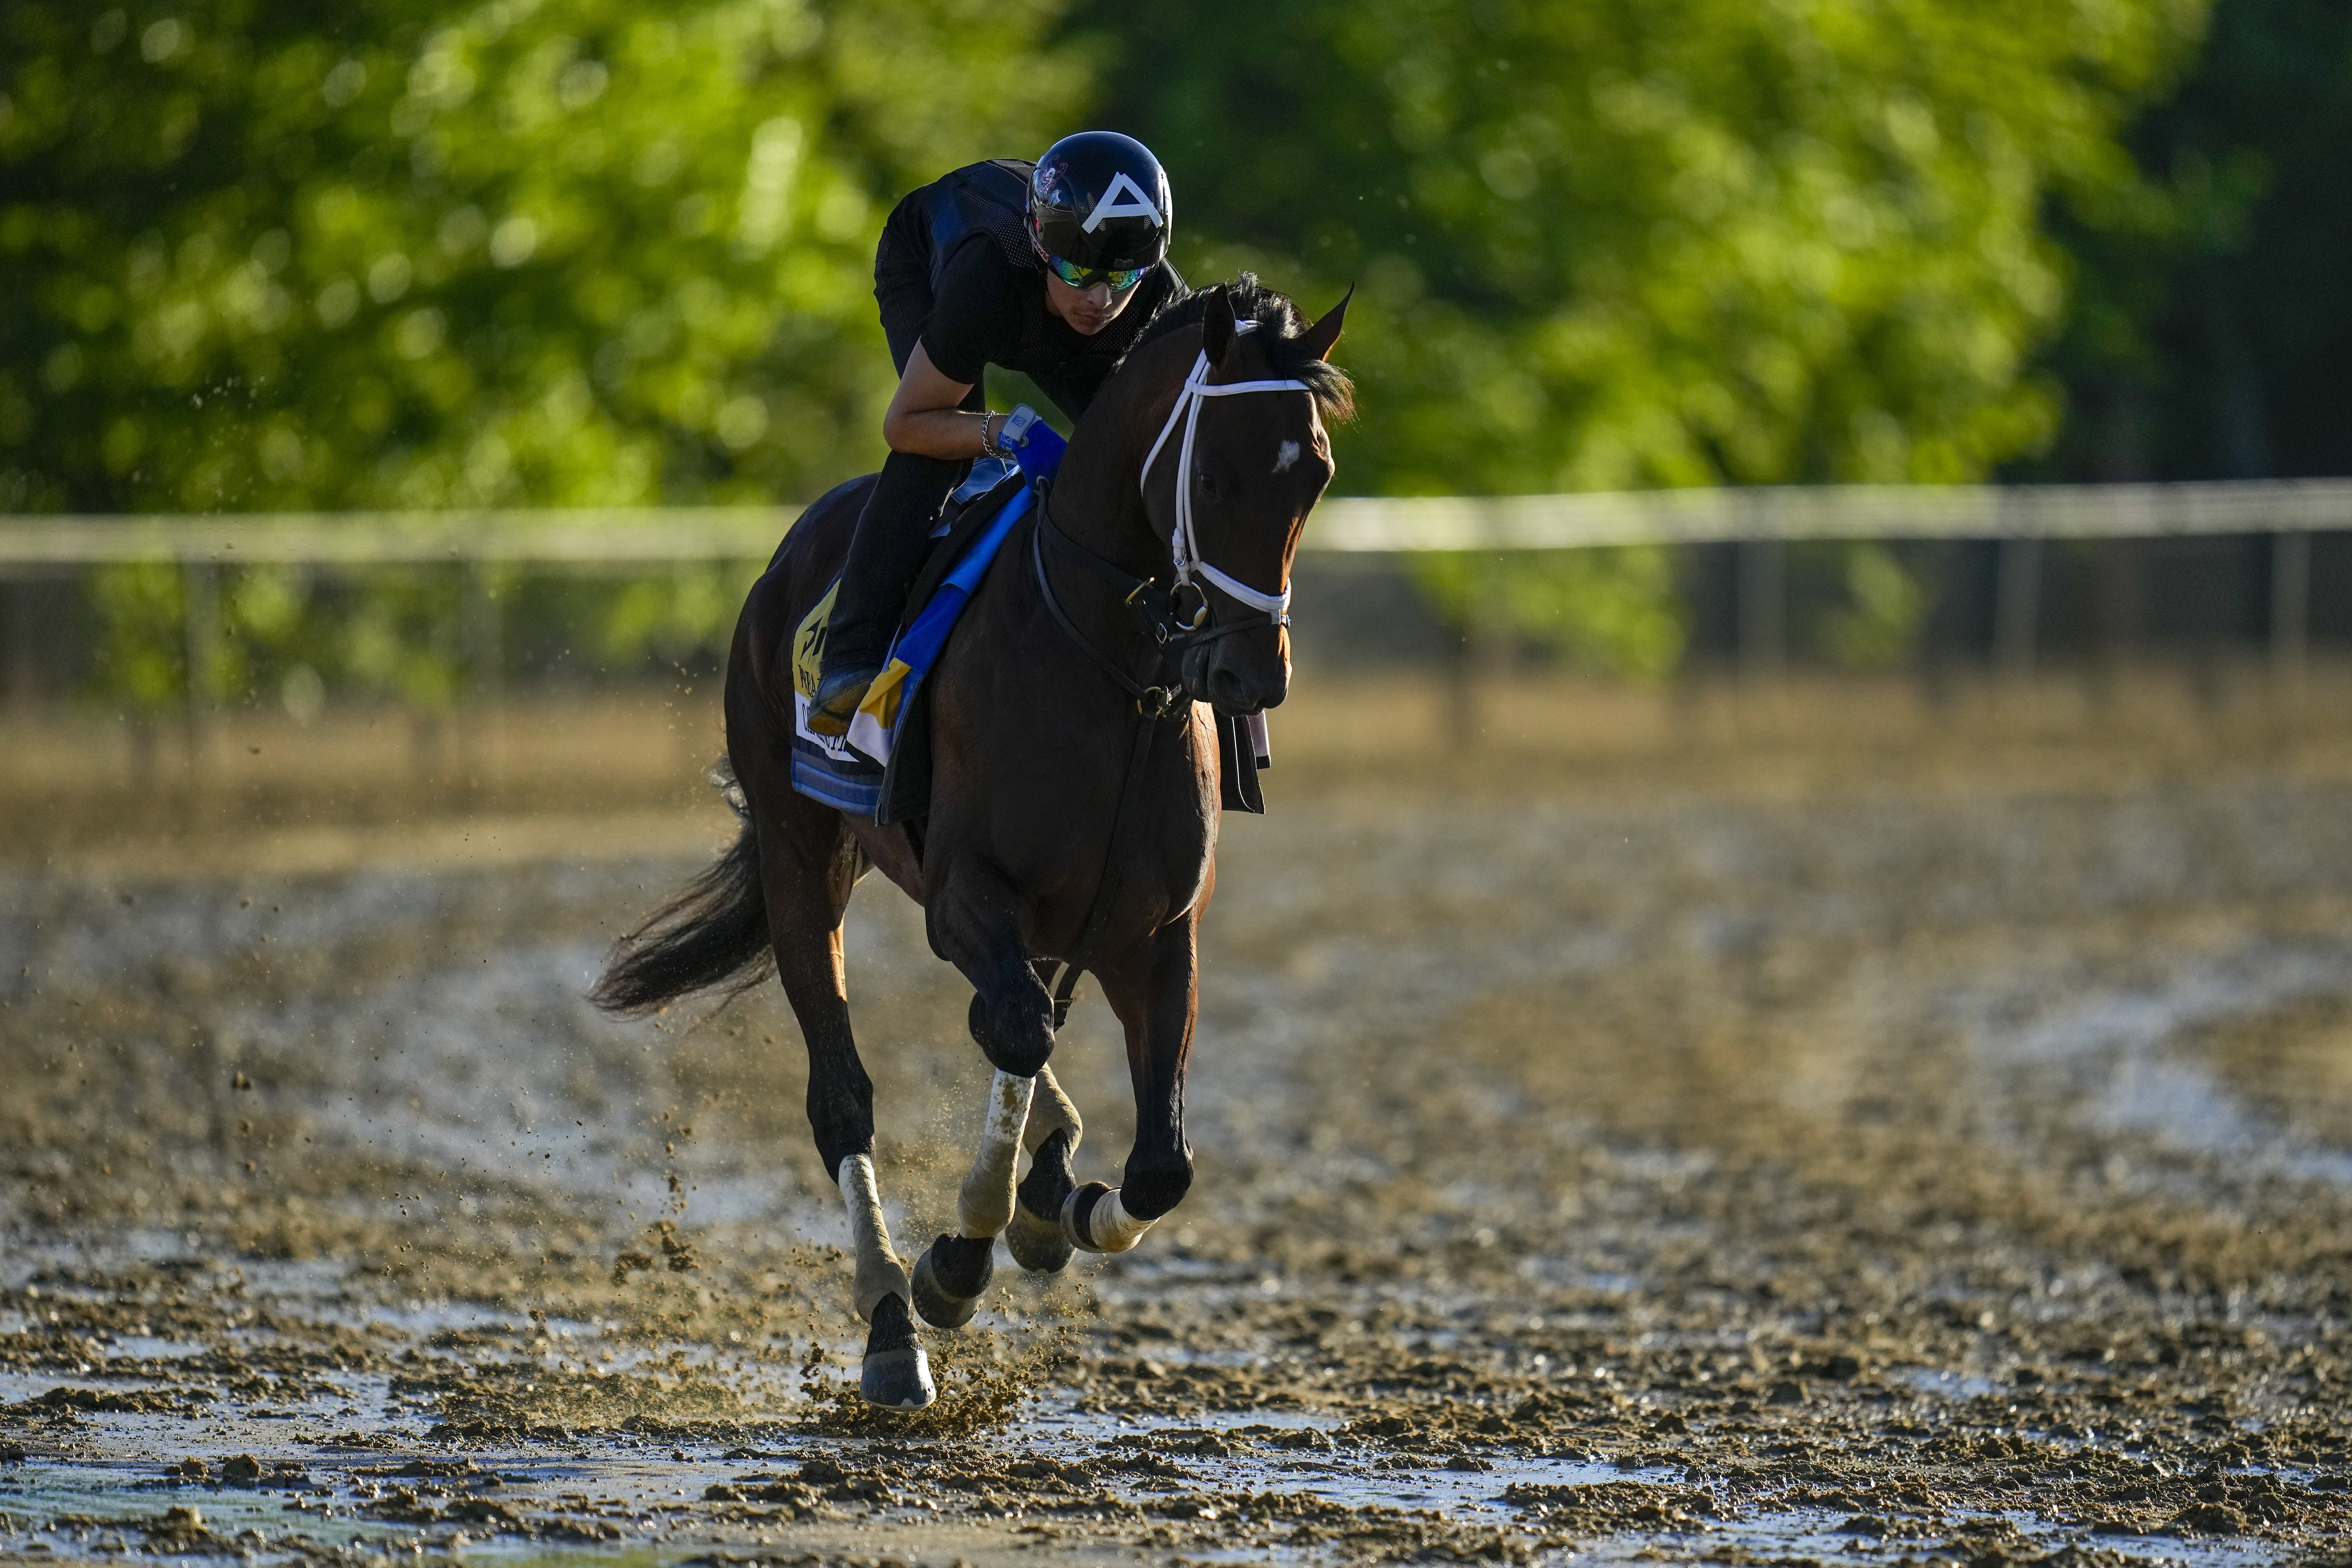 Catching Freedom shows why it was an 'easy decision' to enter him in the Preakness